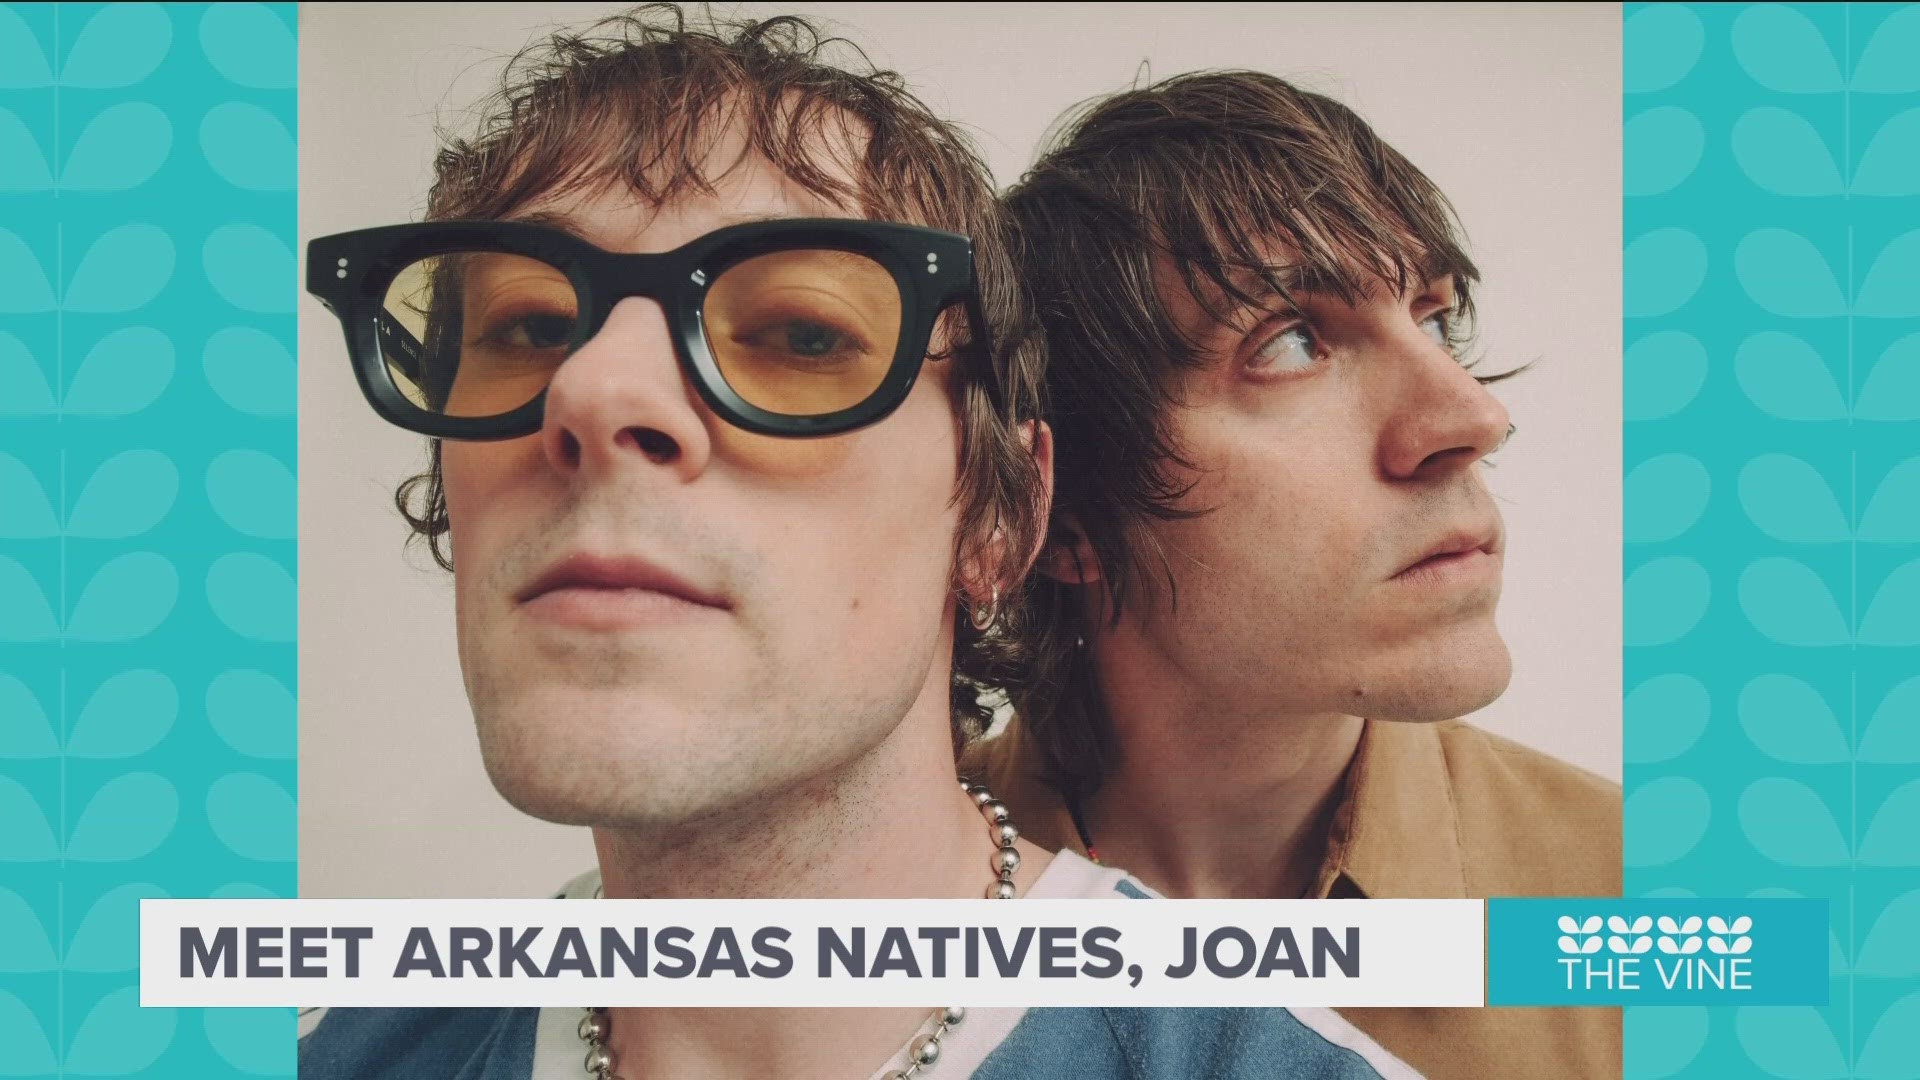 Arkansas-made band Joan, who's amassed hundreds of thousands of monthly listeners on Spotify, has returned home for a show at The Hall.